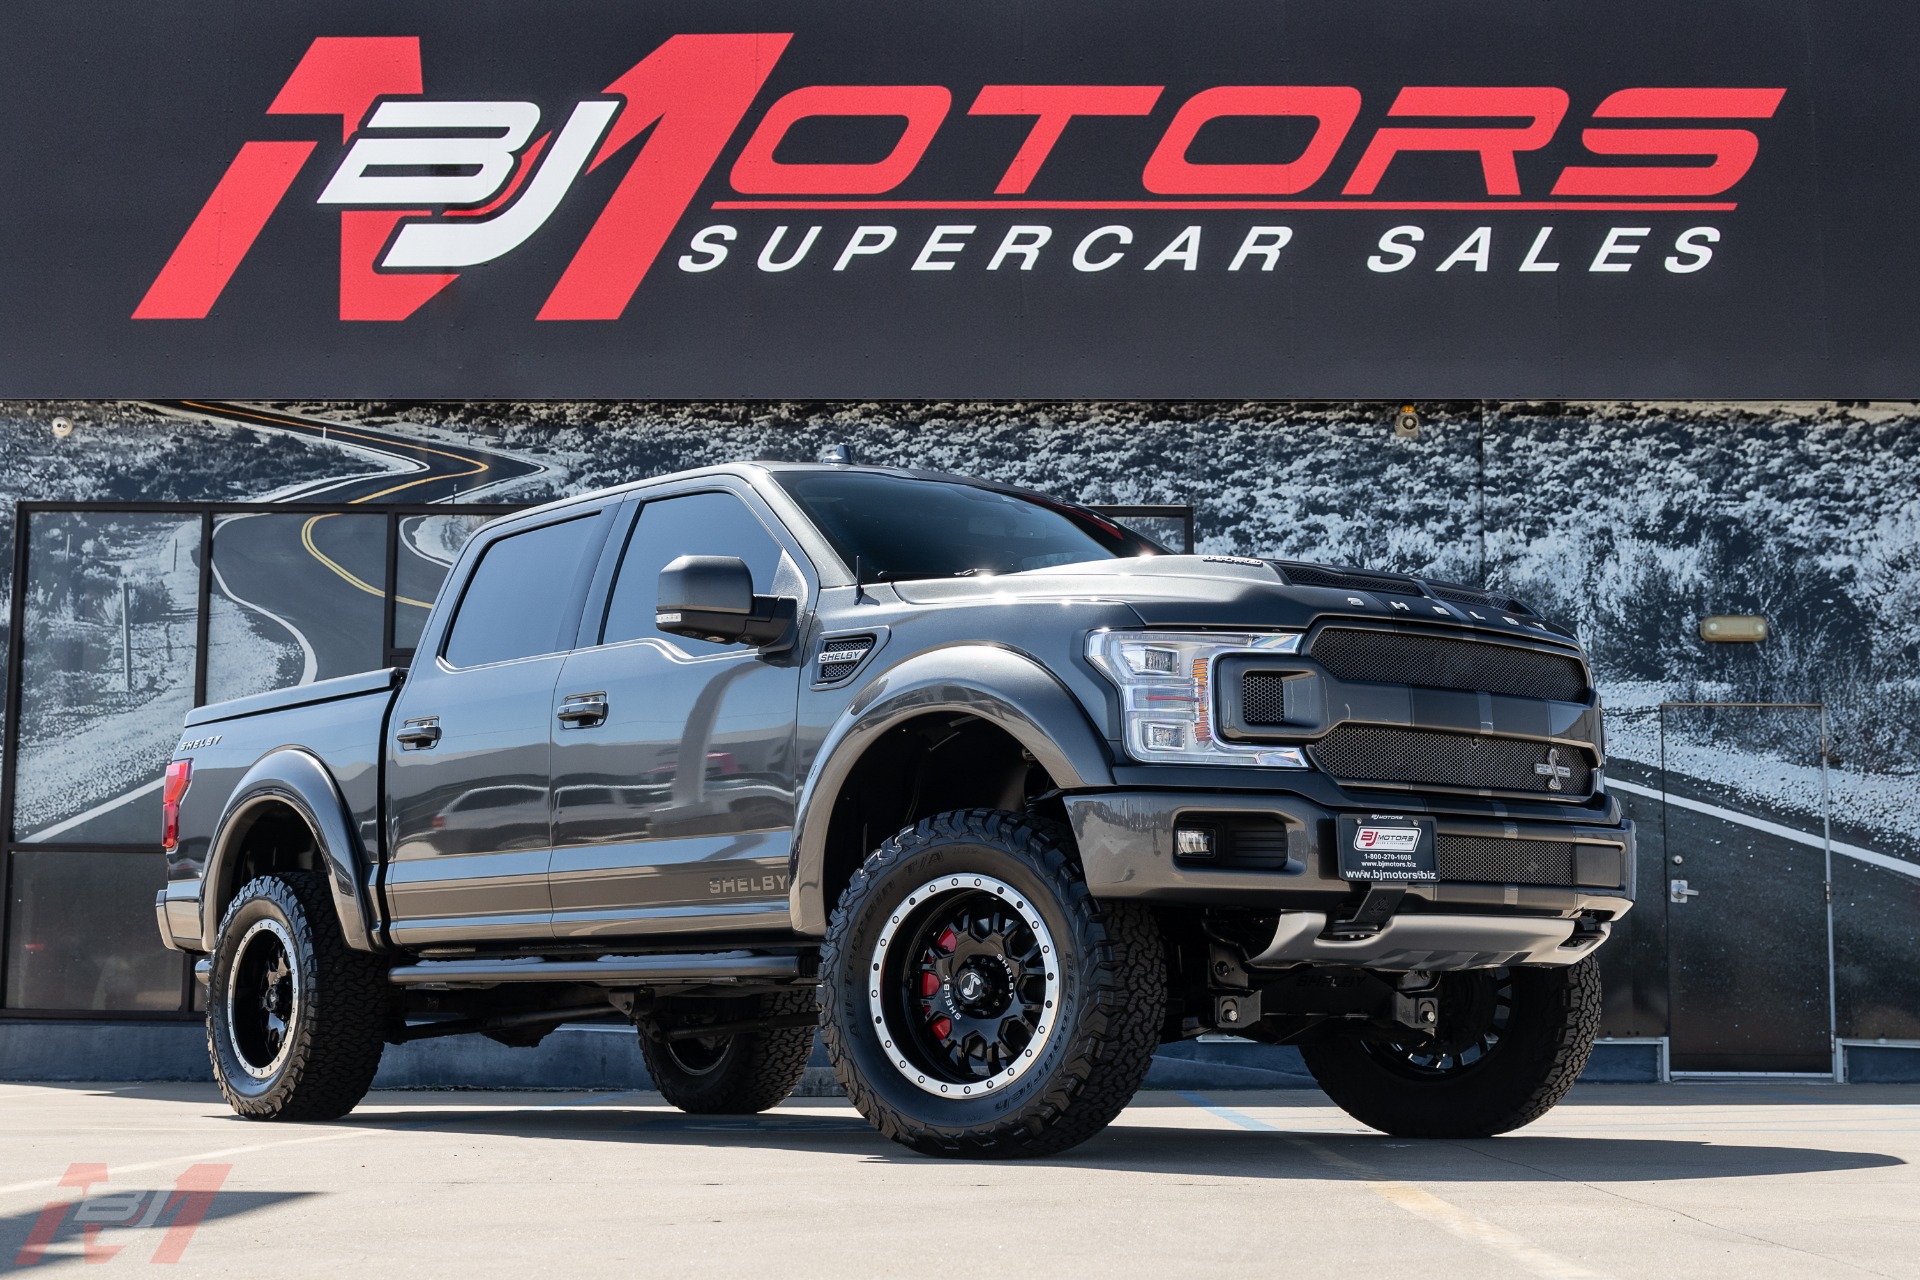 Used-2018-Ford-F-150-Shelby-Supercharged-755HP